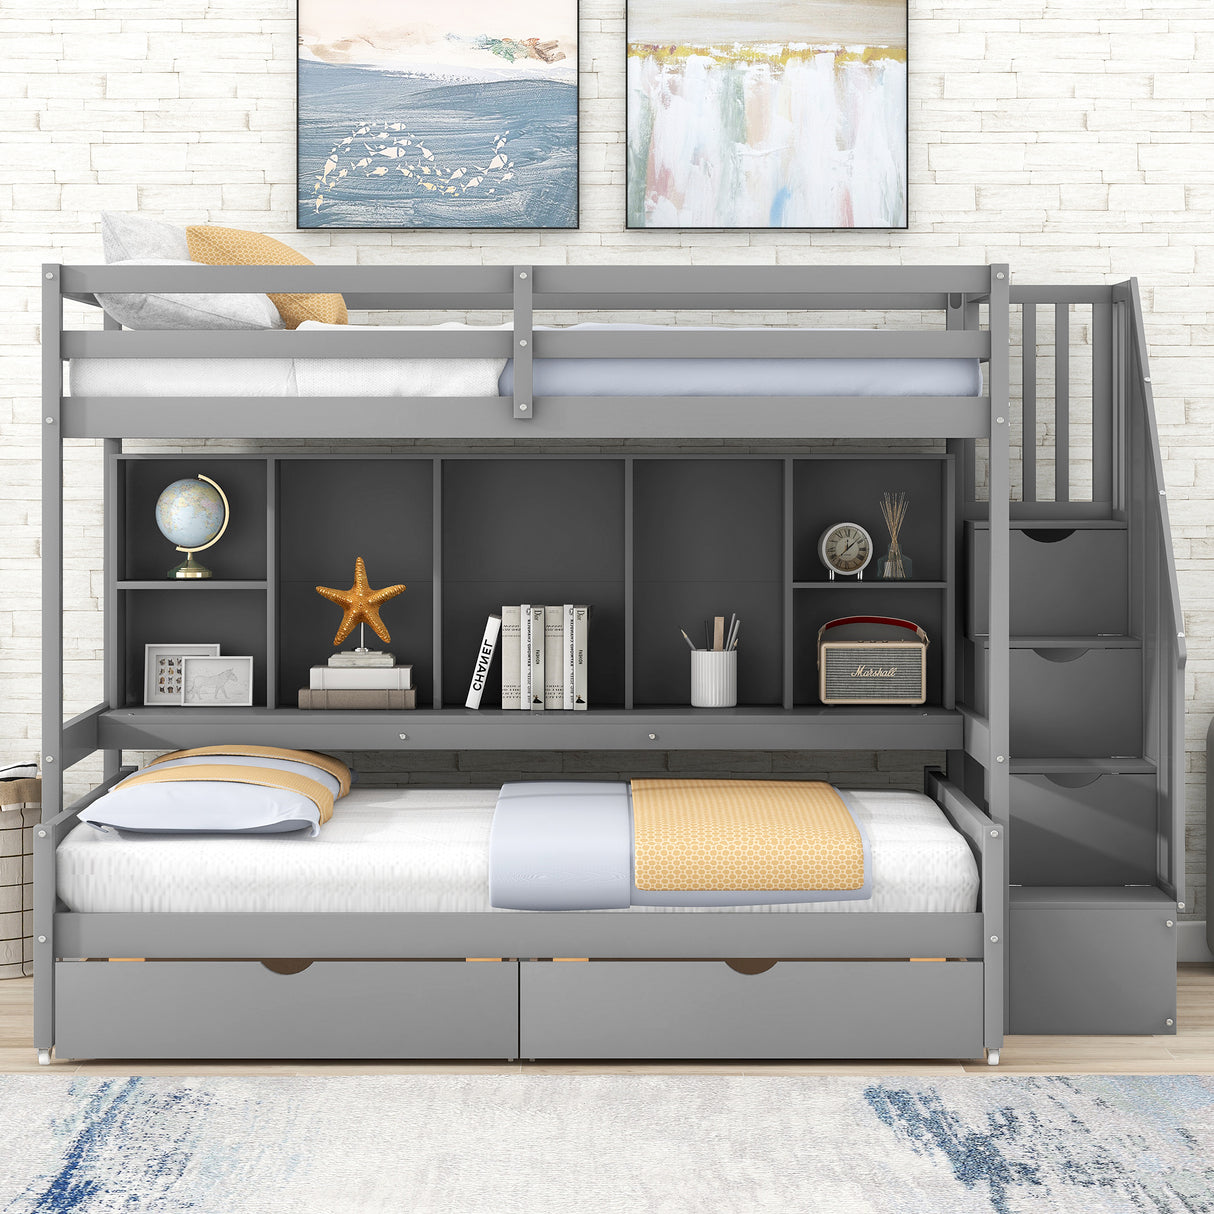 Twin XL over Full Bunk Bed with Built-in Storage Shelves, Drawers and Staircase,Gray - Home Elegance USA